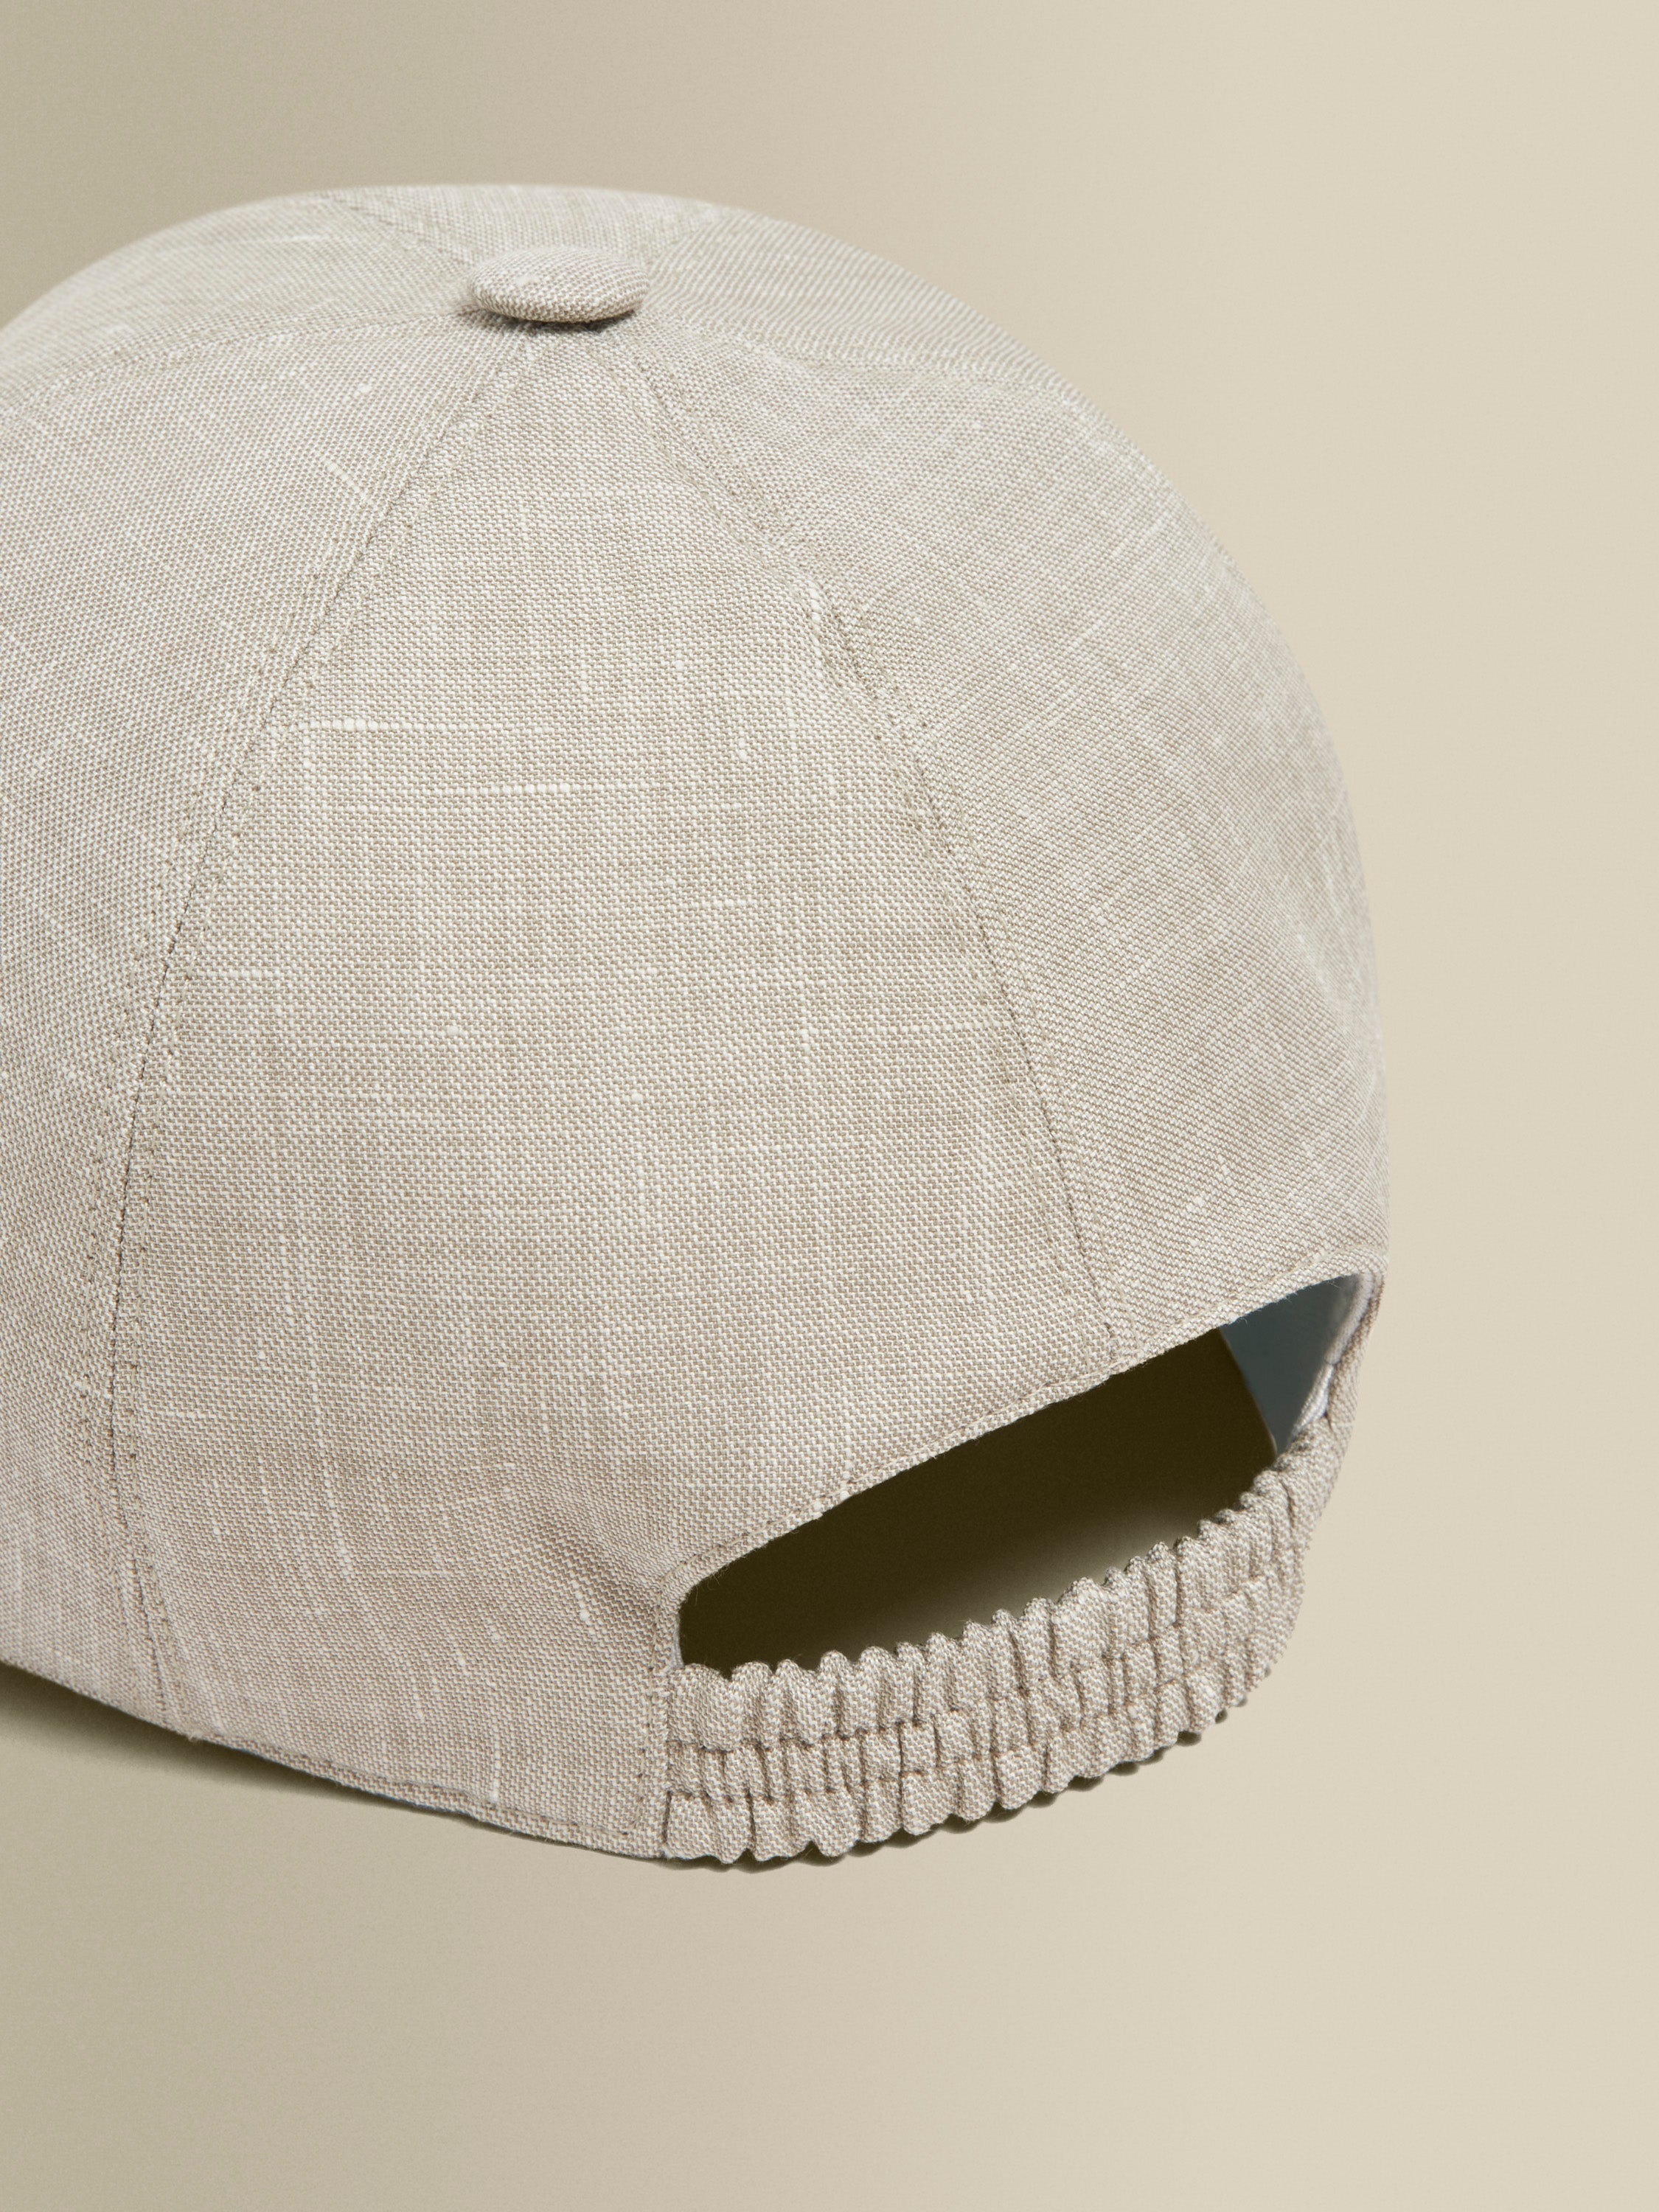 Linen Wool Baseball Cap Taupe Detail Product Image